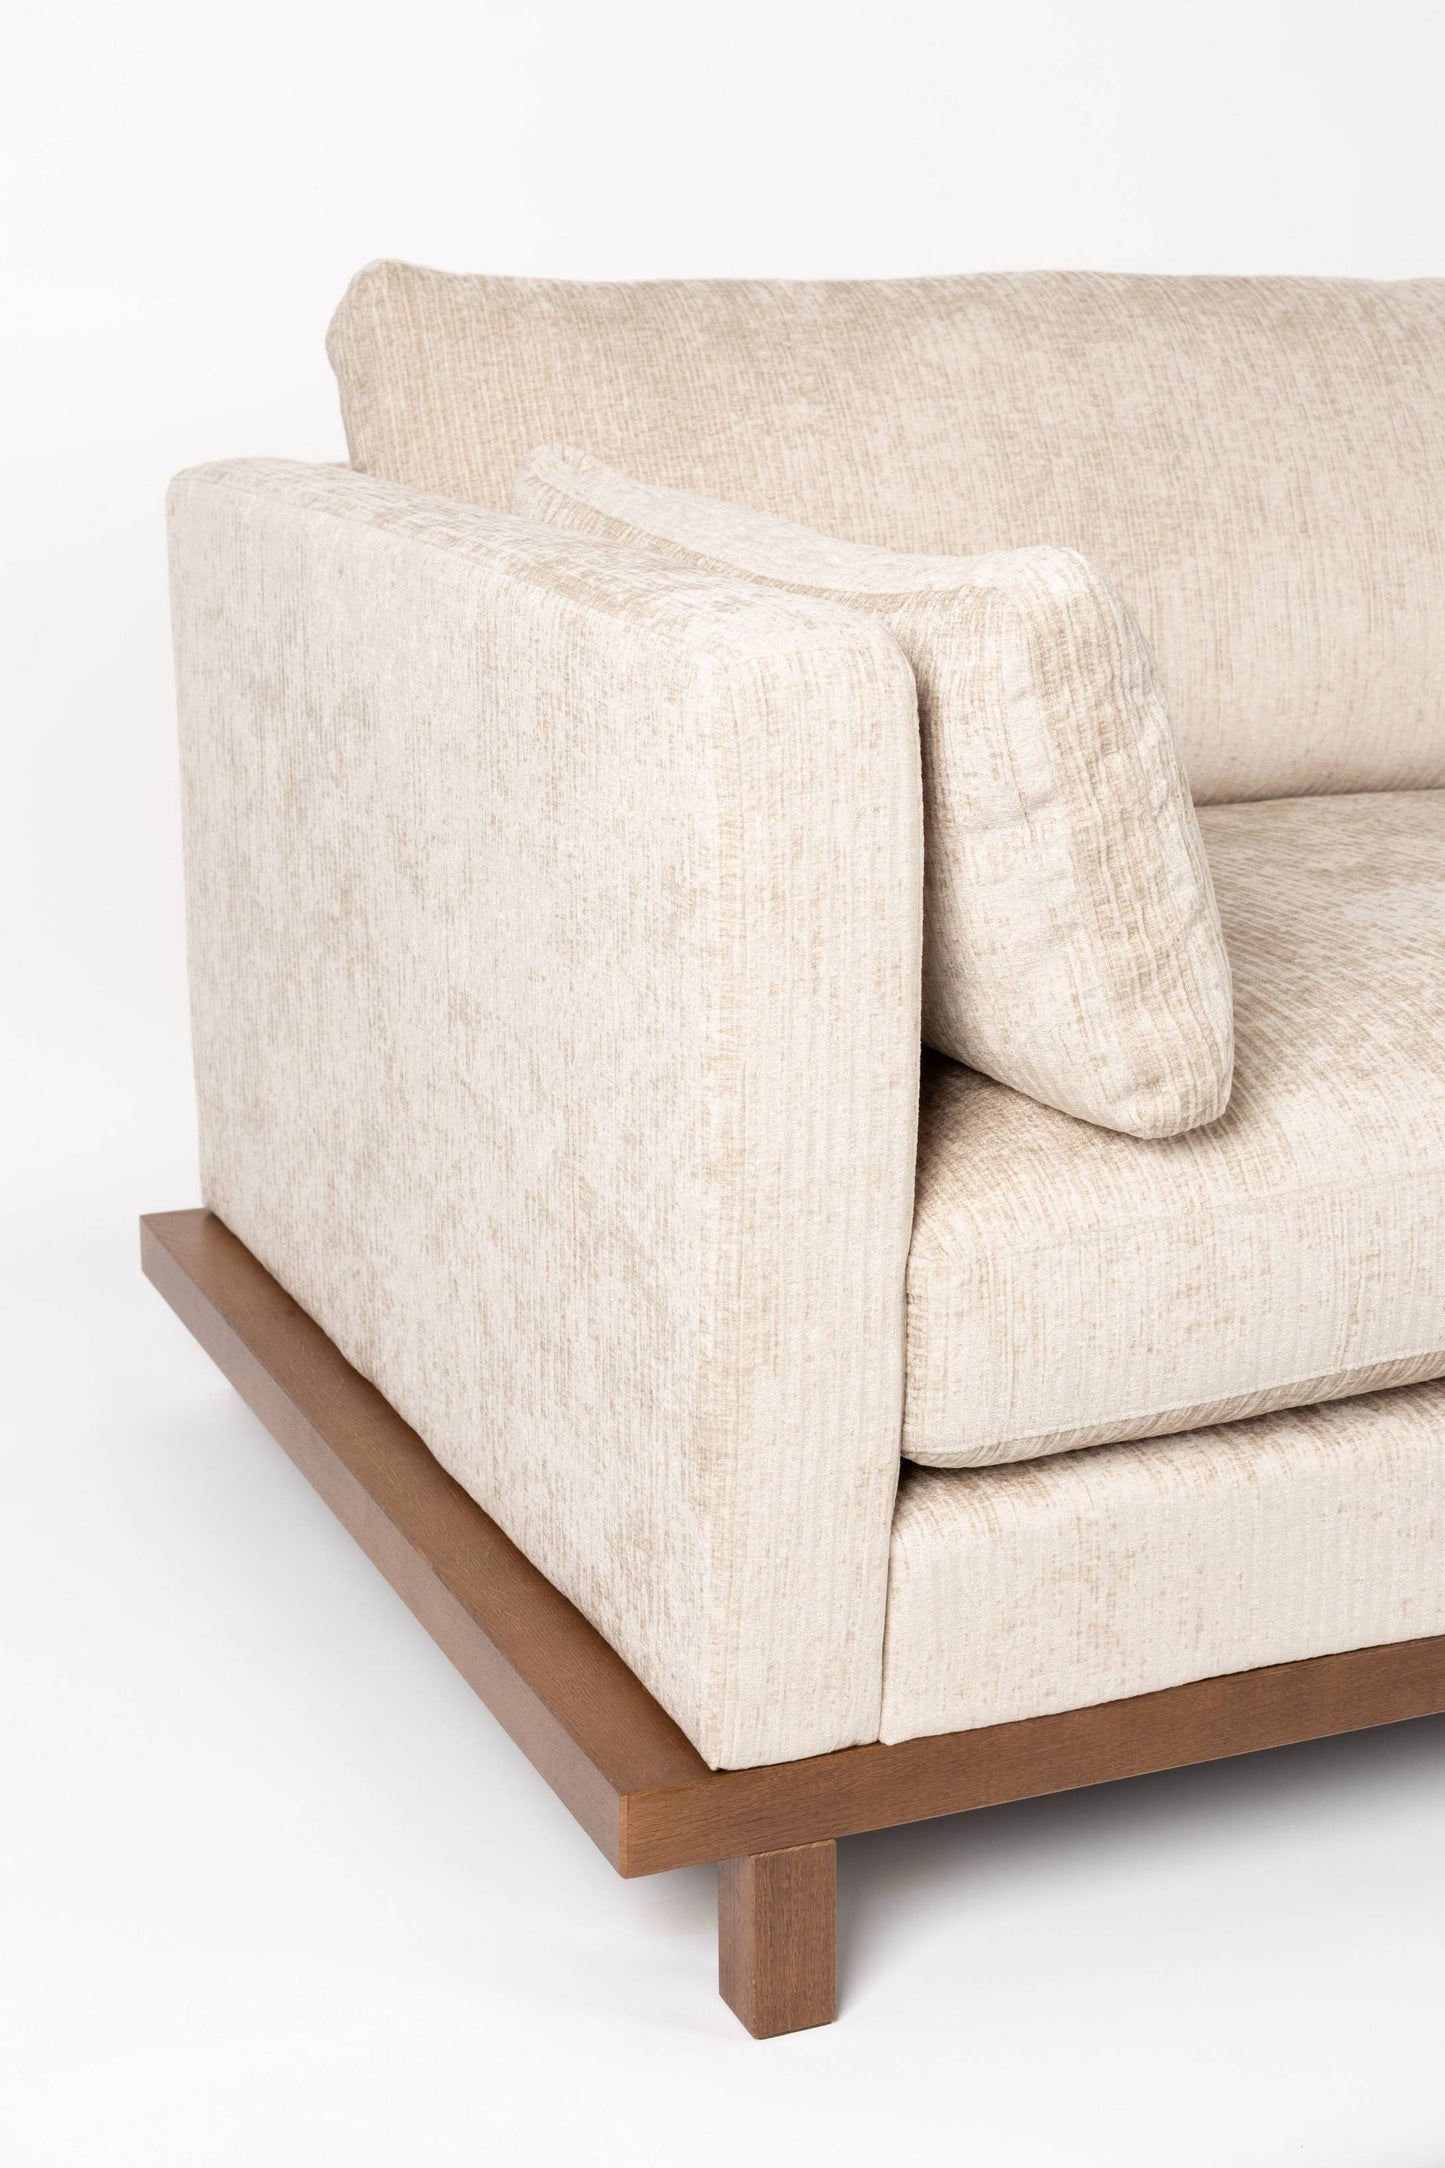 Zuiver | SOFA BLOSSOM 4,5-SEATER SAND Default Title